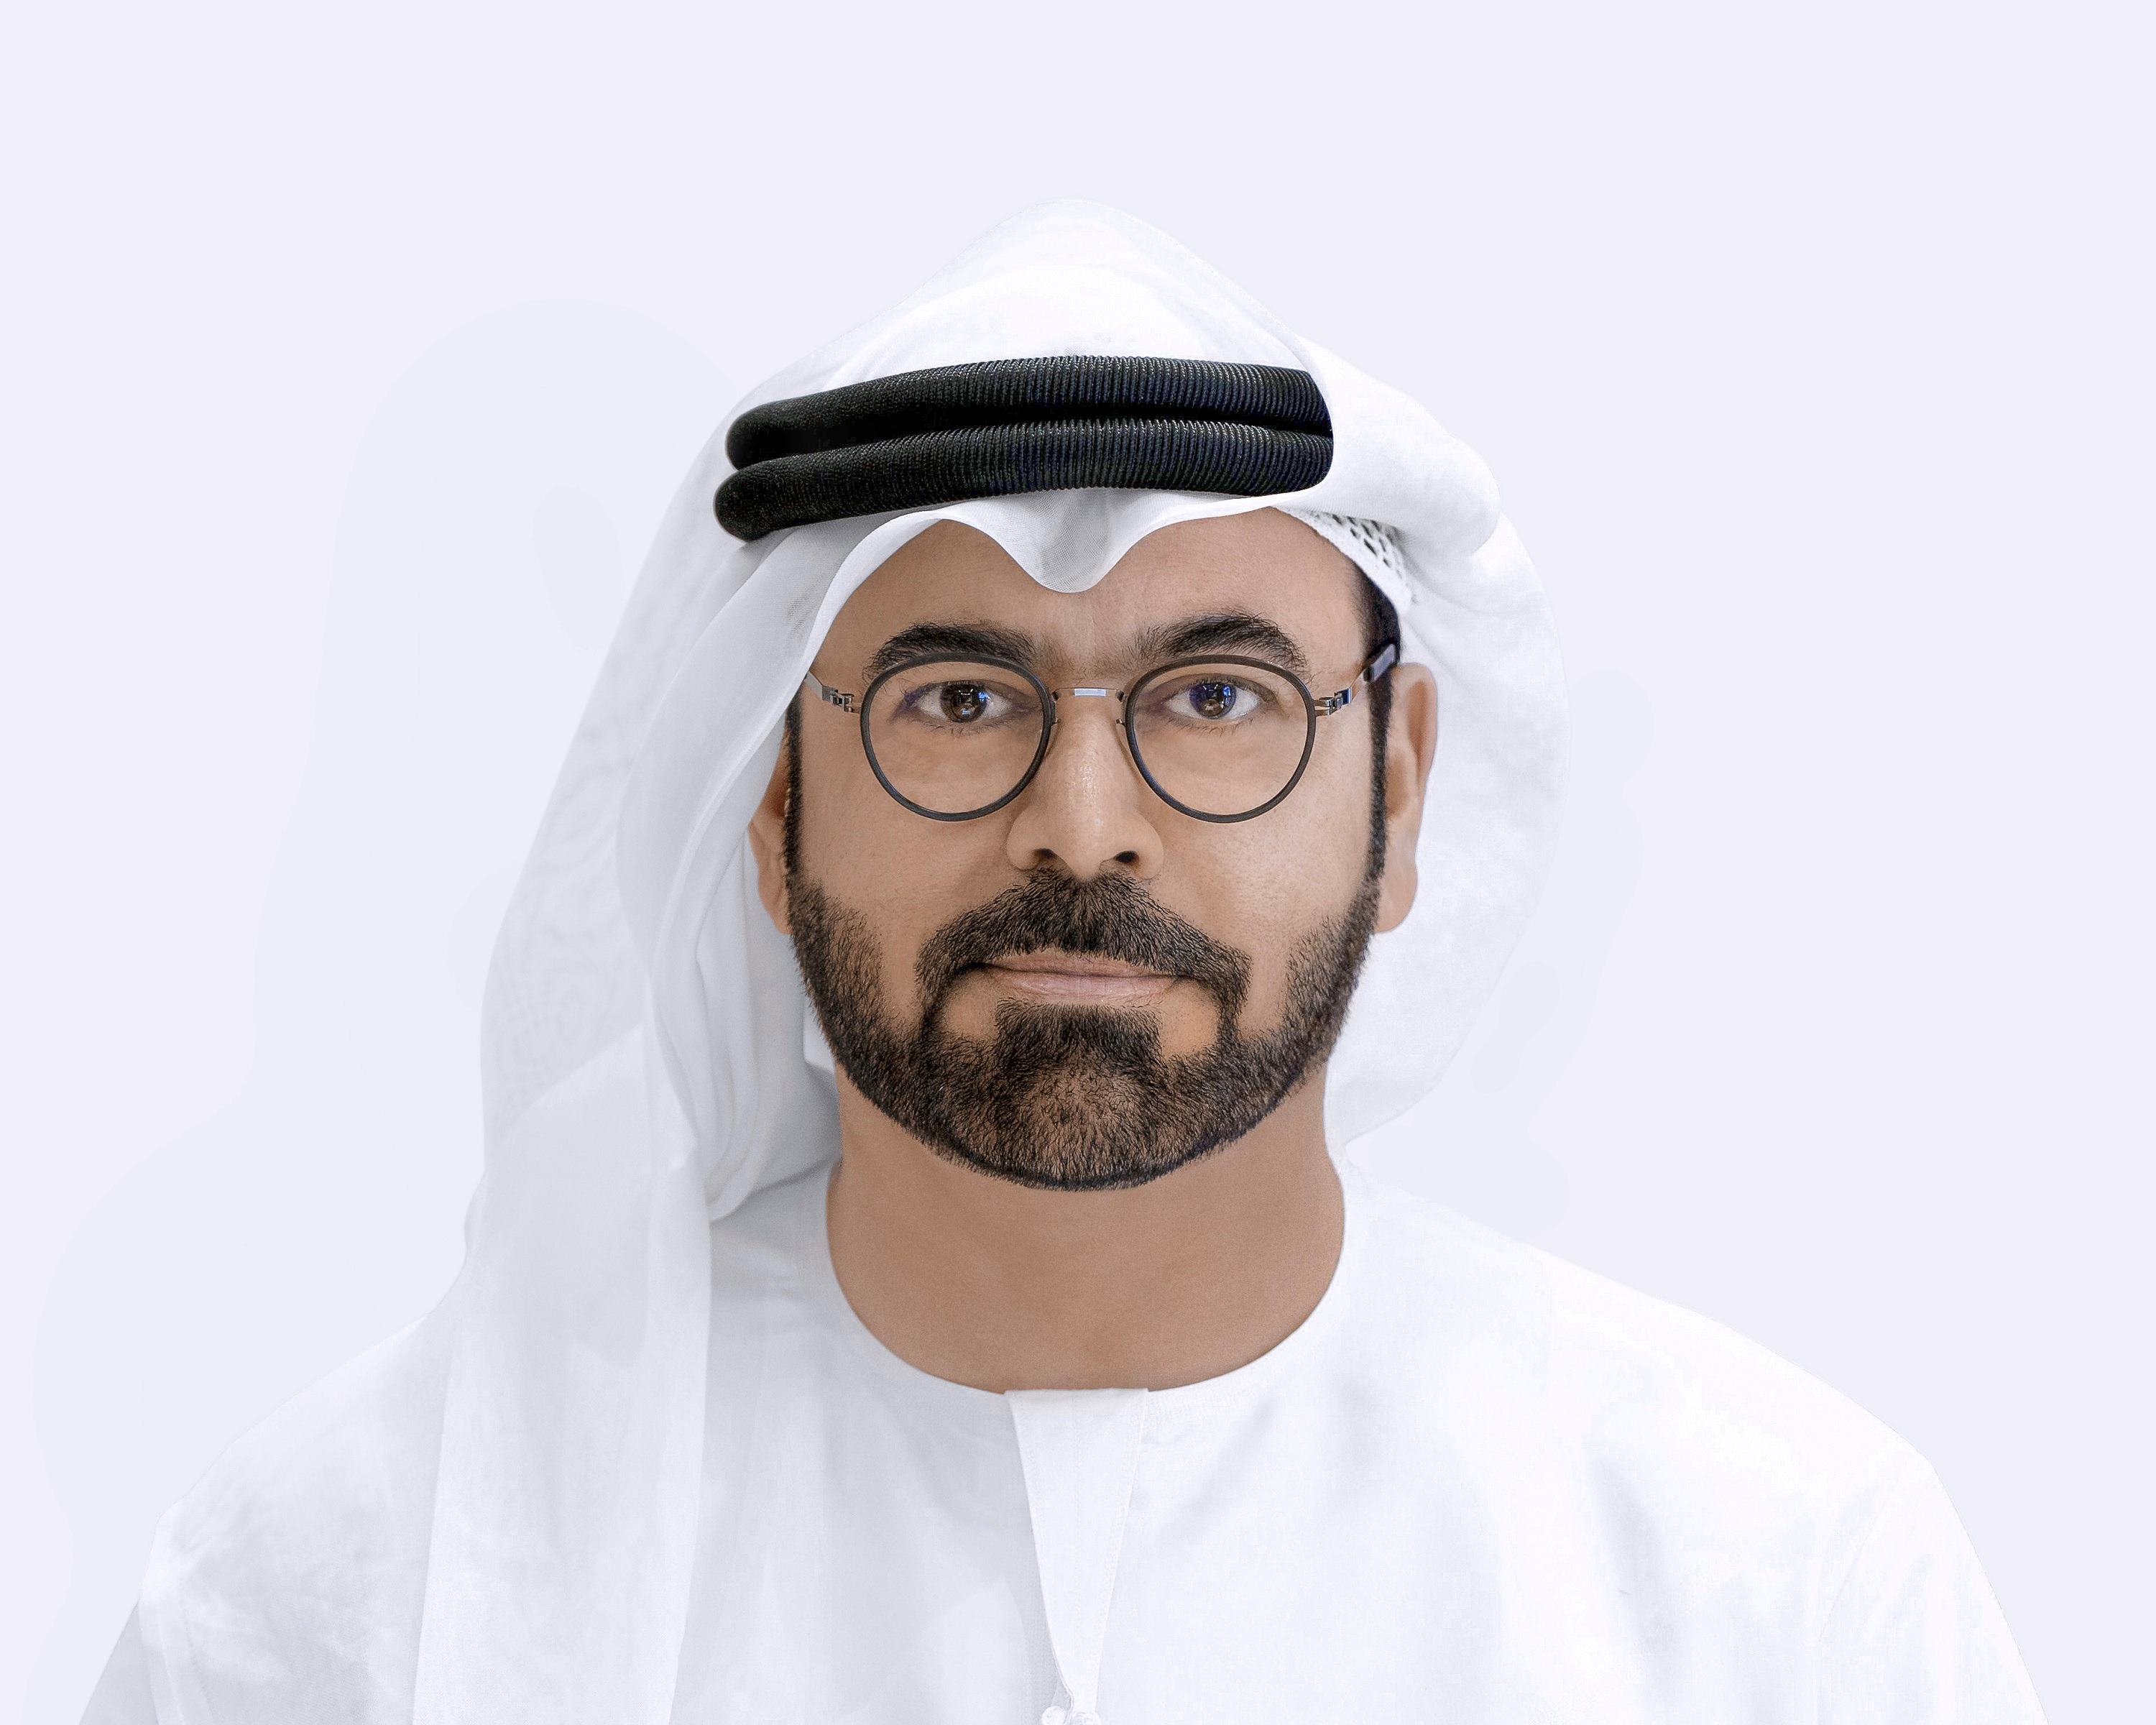 His Excellency Mohammad Abdullah Al Gergawi